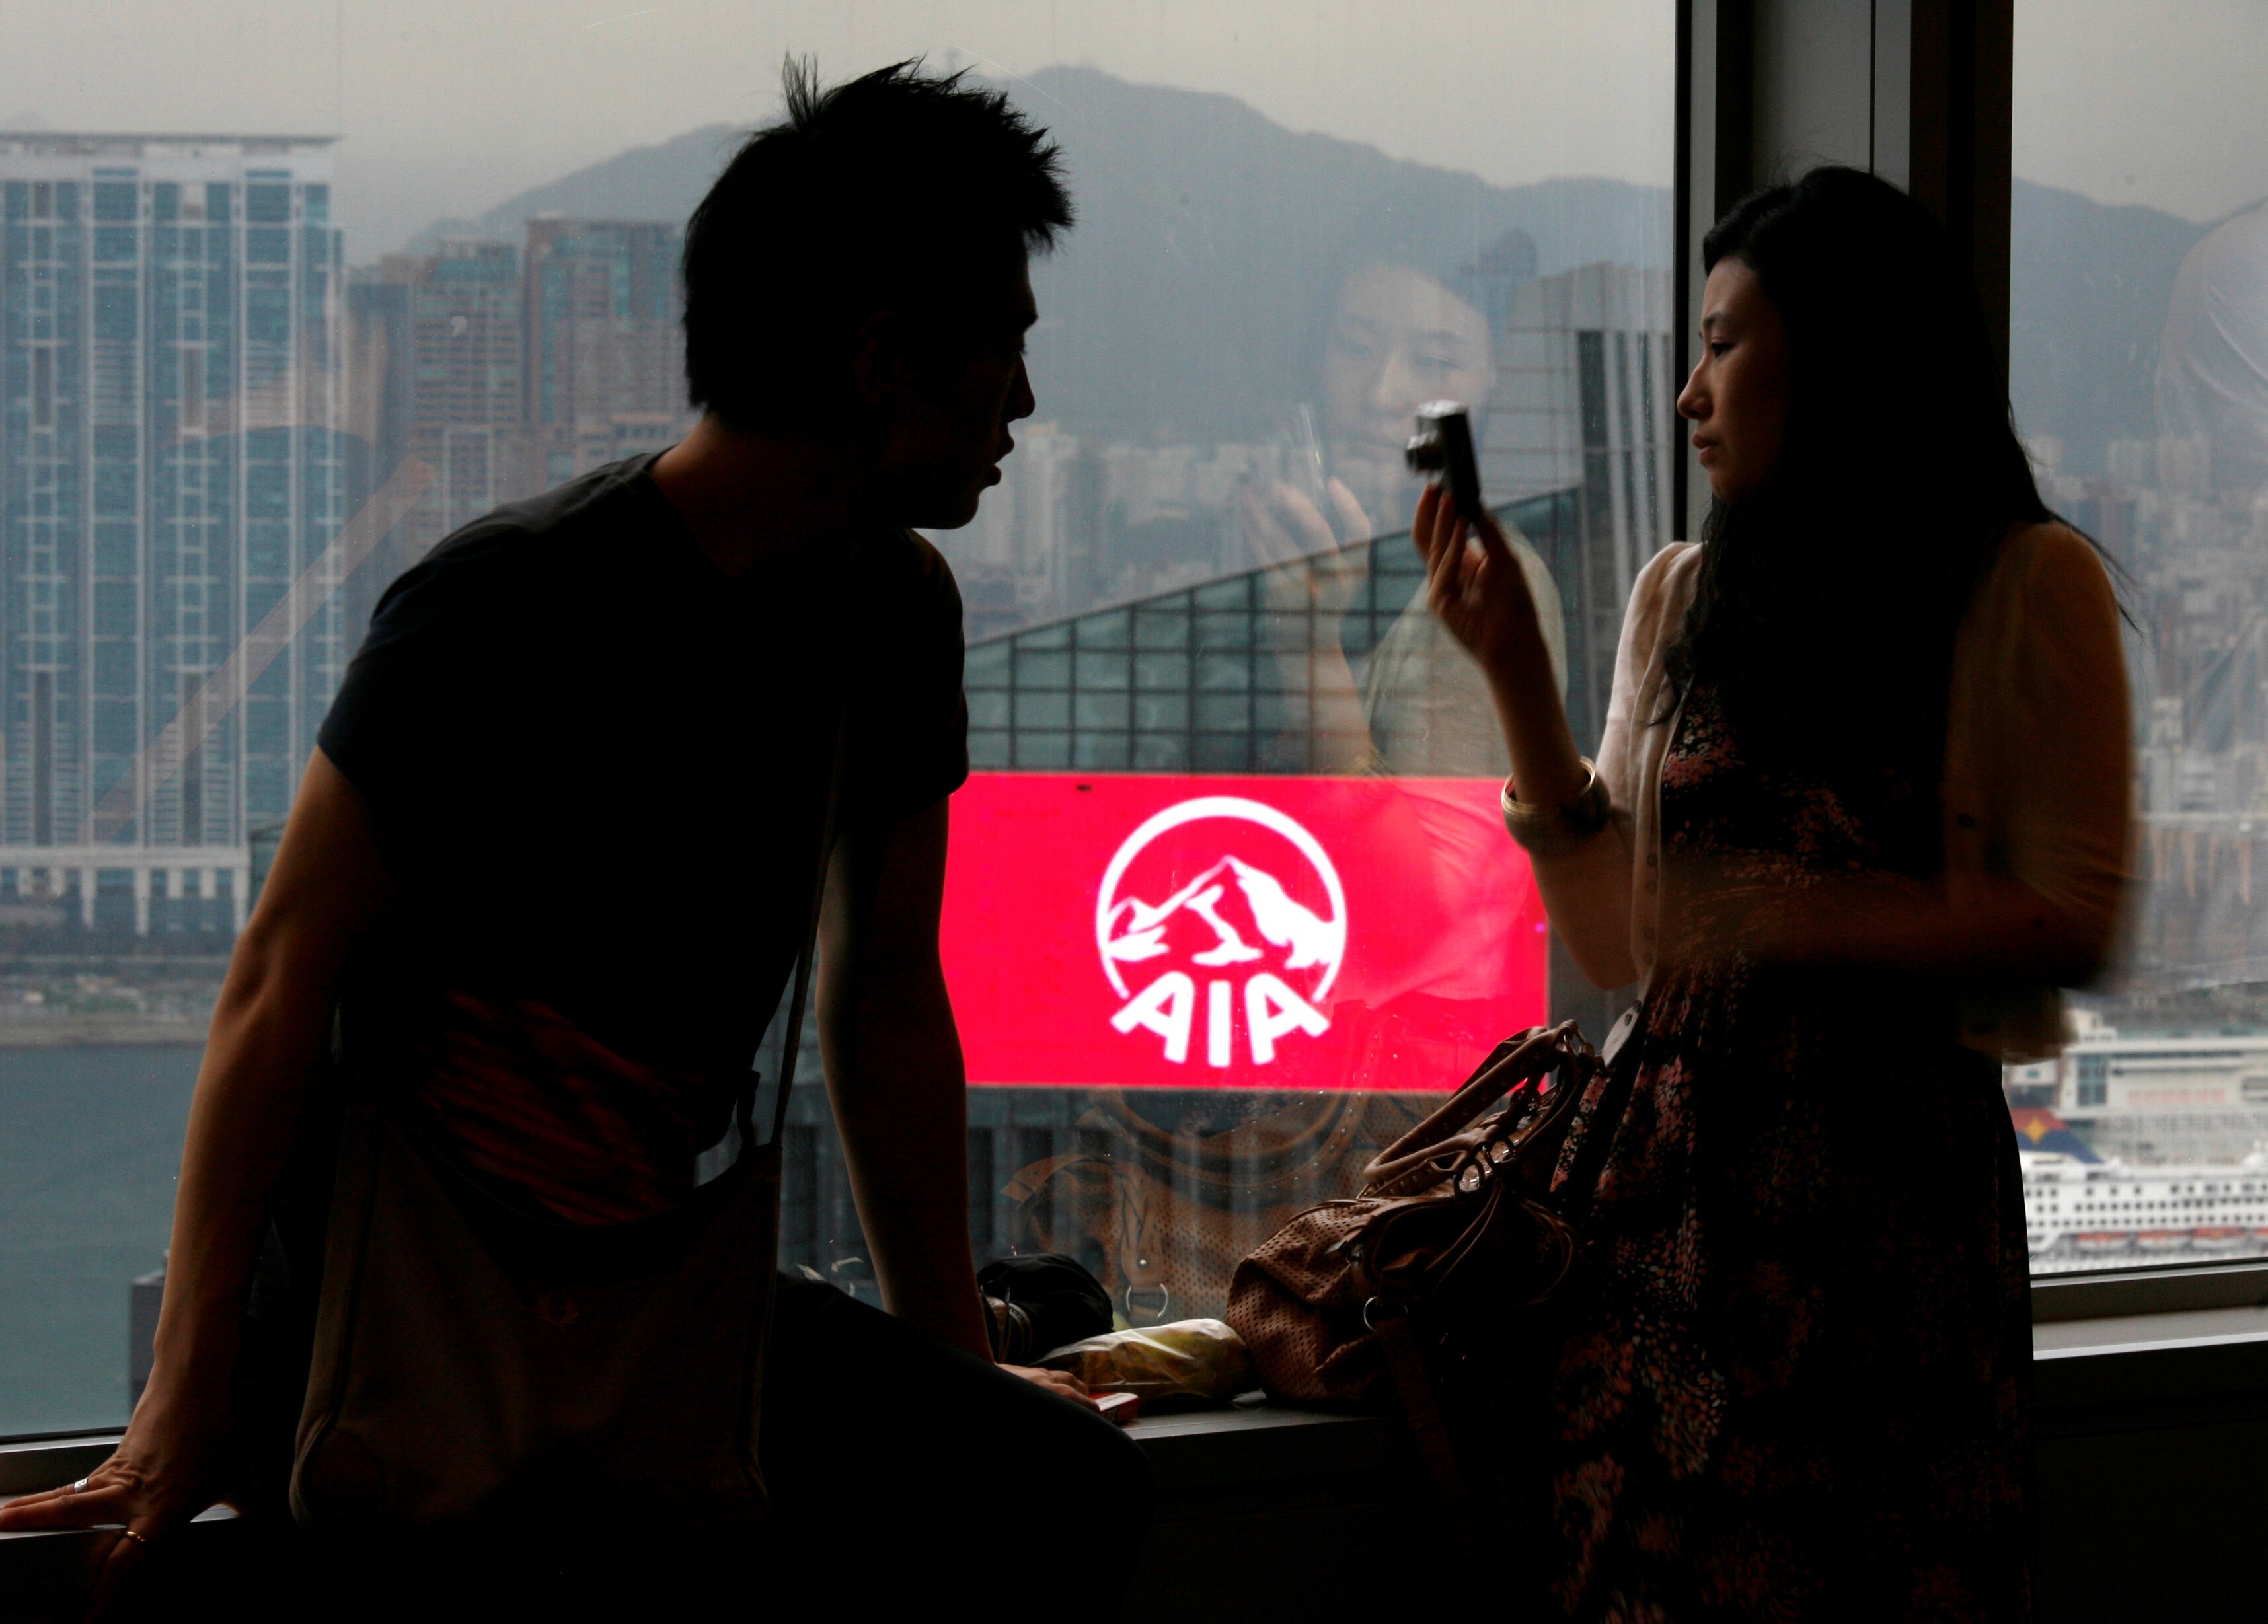 AIA, the largest life insurance company in Hong Kong, plans to hire 6,000 more agents this year, 1,000 more than its average annual recruitment count. Photo: Reuters